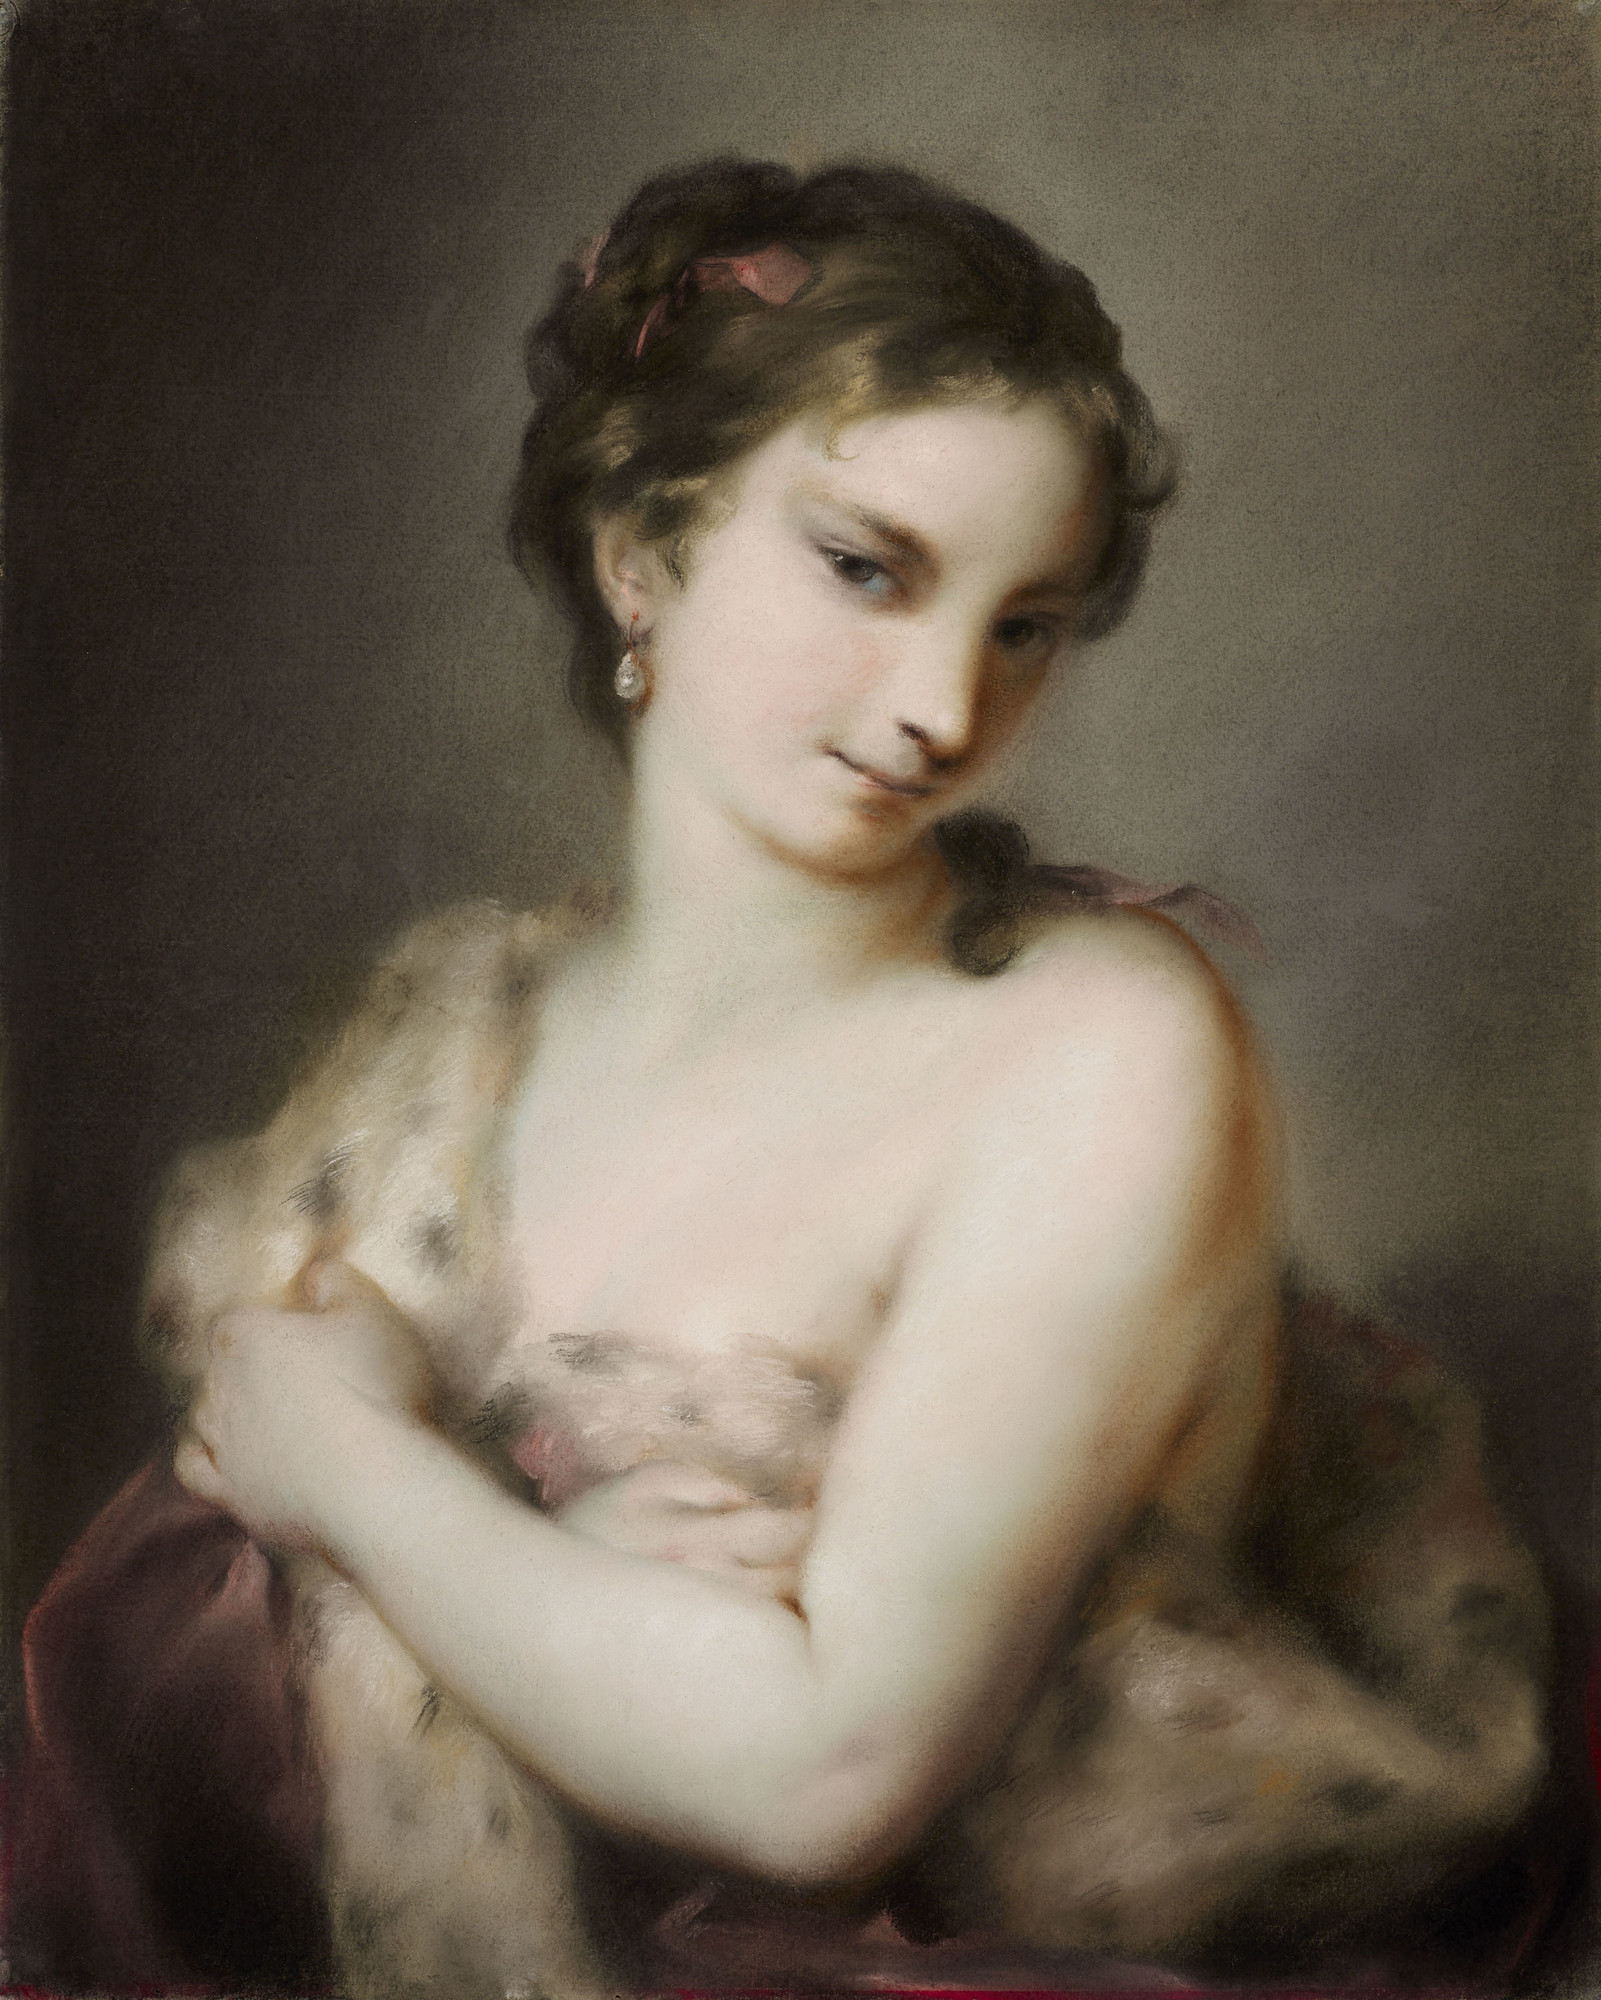 A half-length portrait of the personification of winter, who is pictured as a young woman wrapping herself in a purple velvet cloak, trimmed with ermine fur. She wears large pearl earrings and ribbons in her hair. She turns her shoulder to the viewer, looking out directly with a slight smile. 